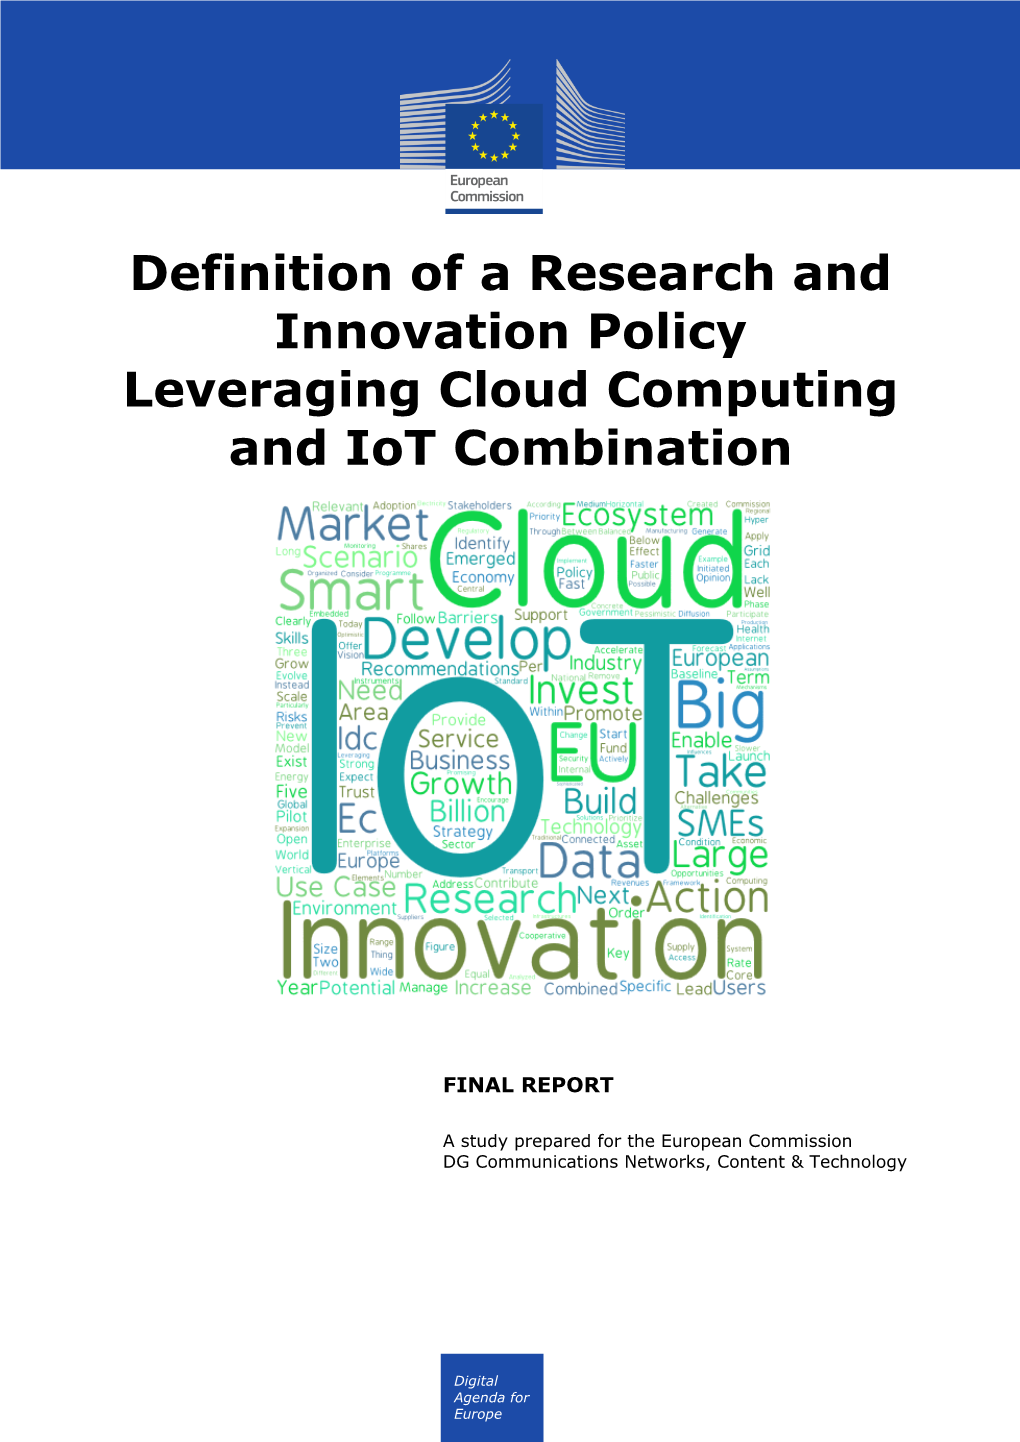 Definition of a Research and Innovation Policy Leveraging Cloud Computing and Iot Combination